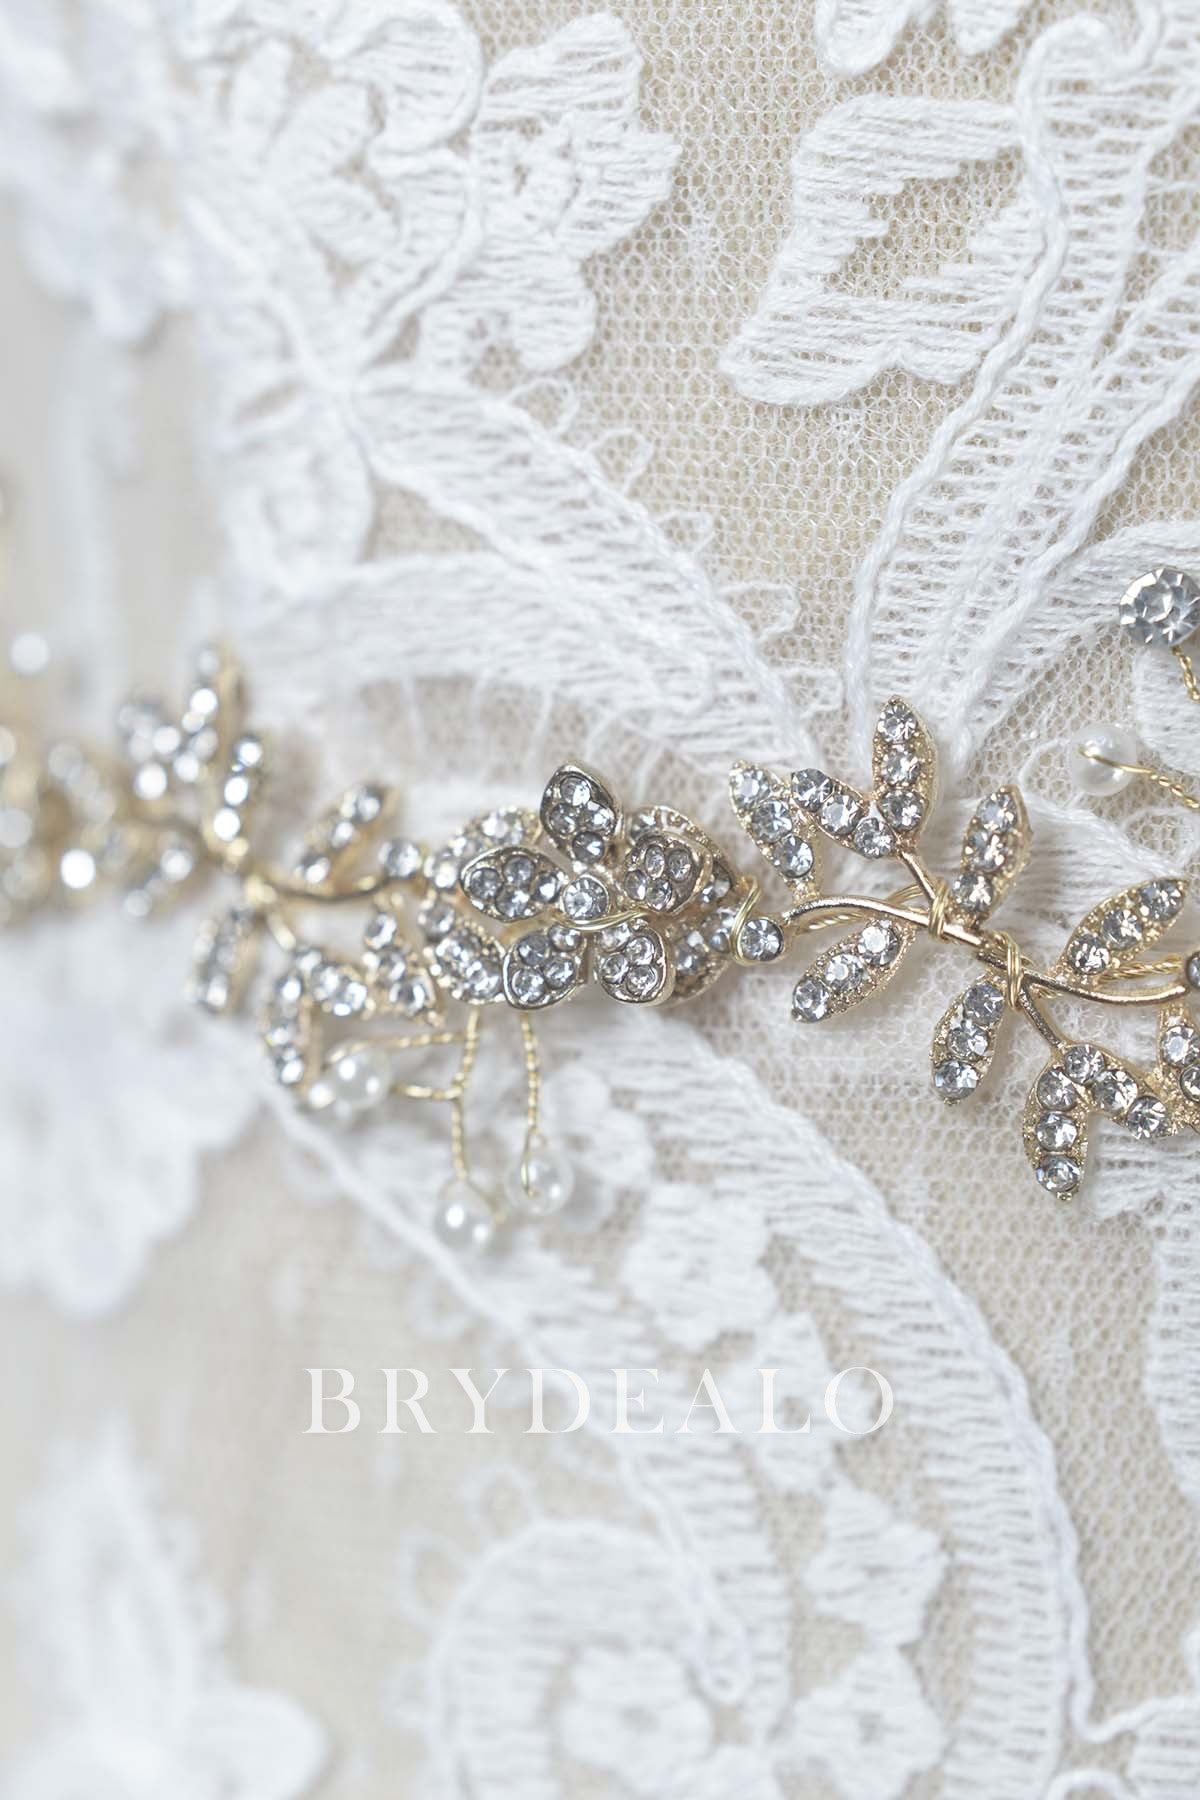 Golden Vine Bridal Sash with Crystals and Pearls for Wedding Dress